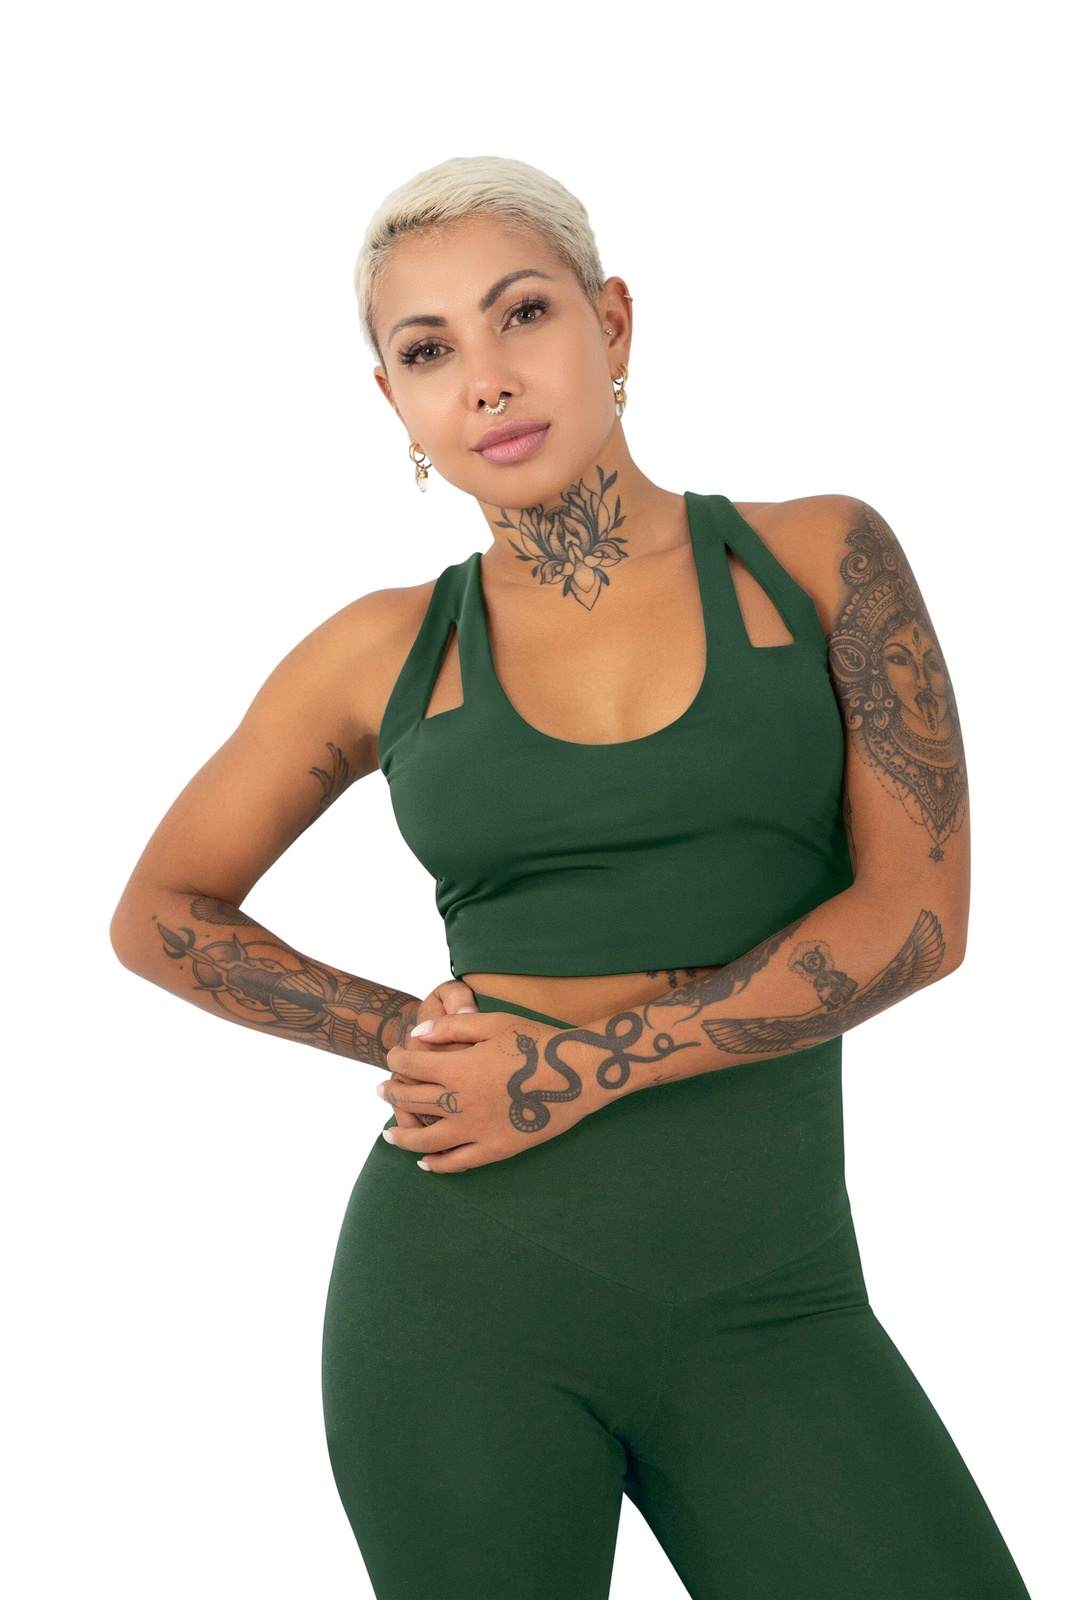 Seamless crop tank in evergreen worn with matching evergreen high waisted leggings, a complete outfit set made from eco friendly recycled plastic fabric by Ekoluxe, a sustainable loungewear brand